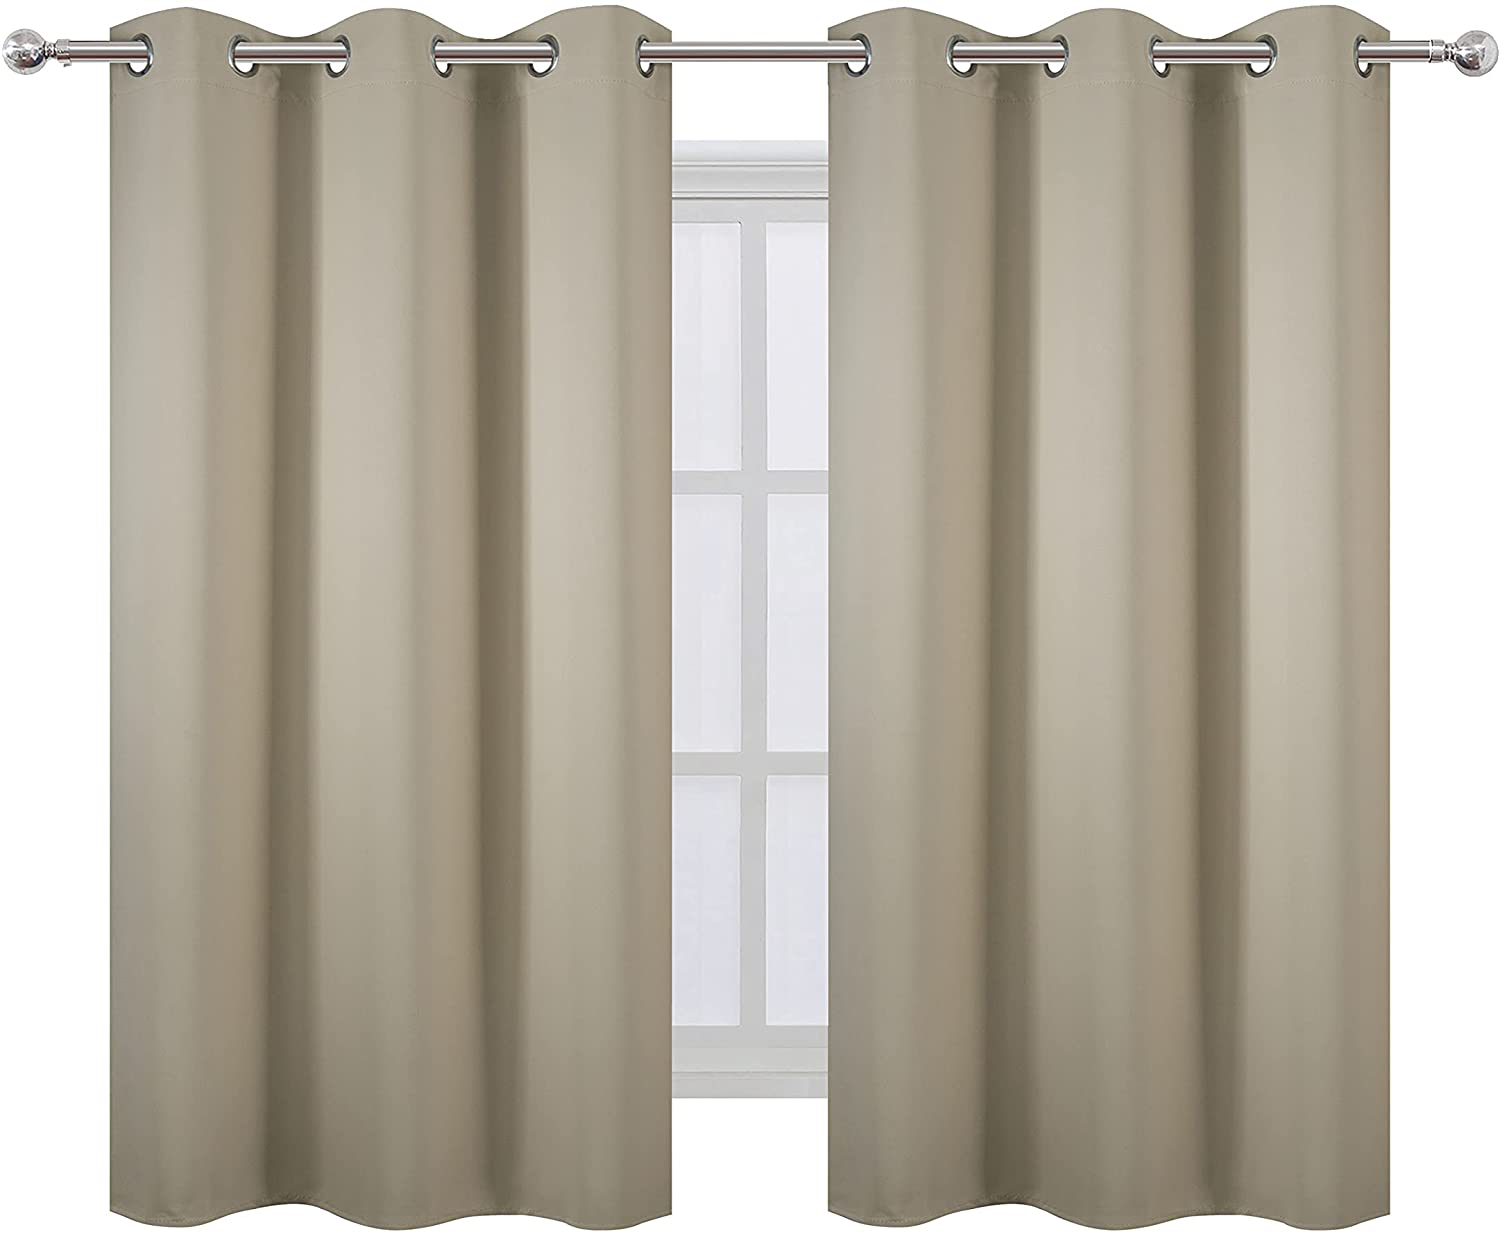 LEMOMO Turquoise/Teal Blackout Curtains/38 x 54 Inch/Set of Two Panels Grommet Living Room Curtains